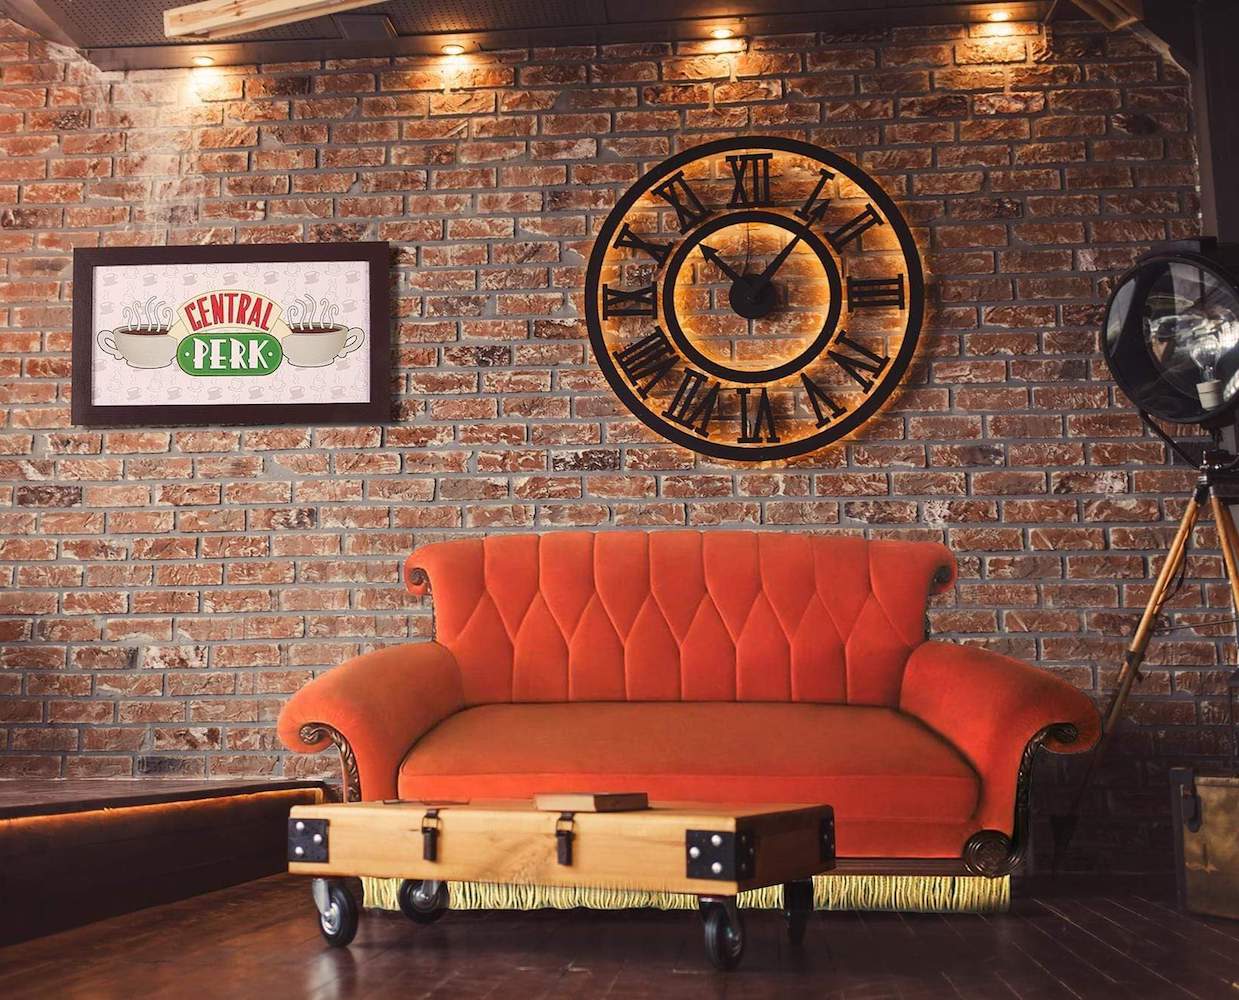 A Real Life 'Central Perk' Coffee Shop May Finally Be Coming To